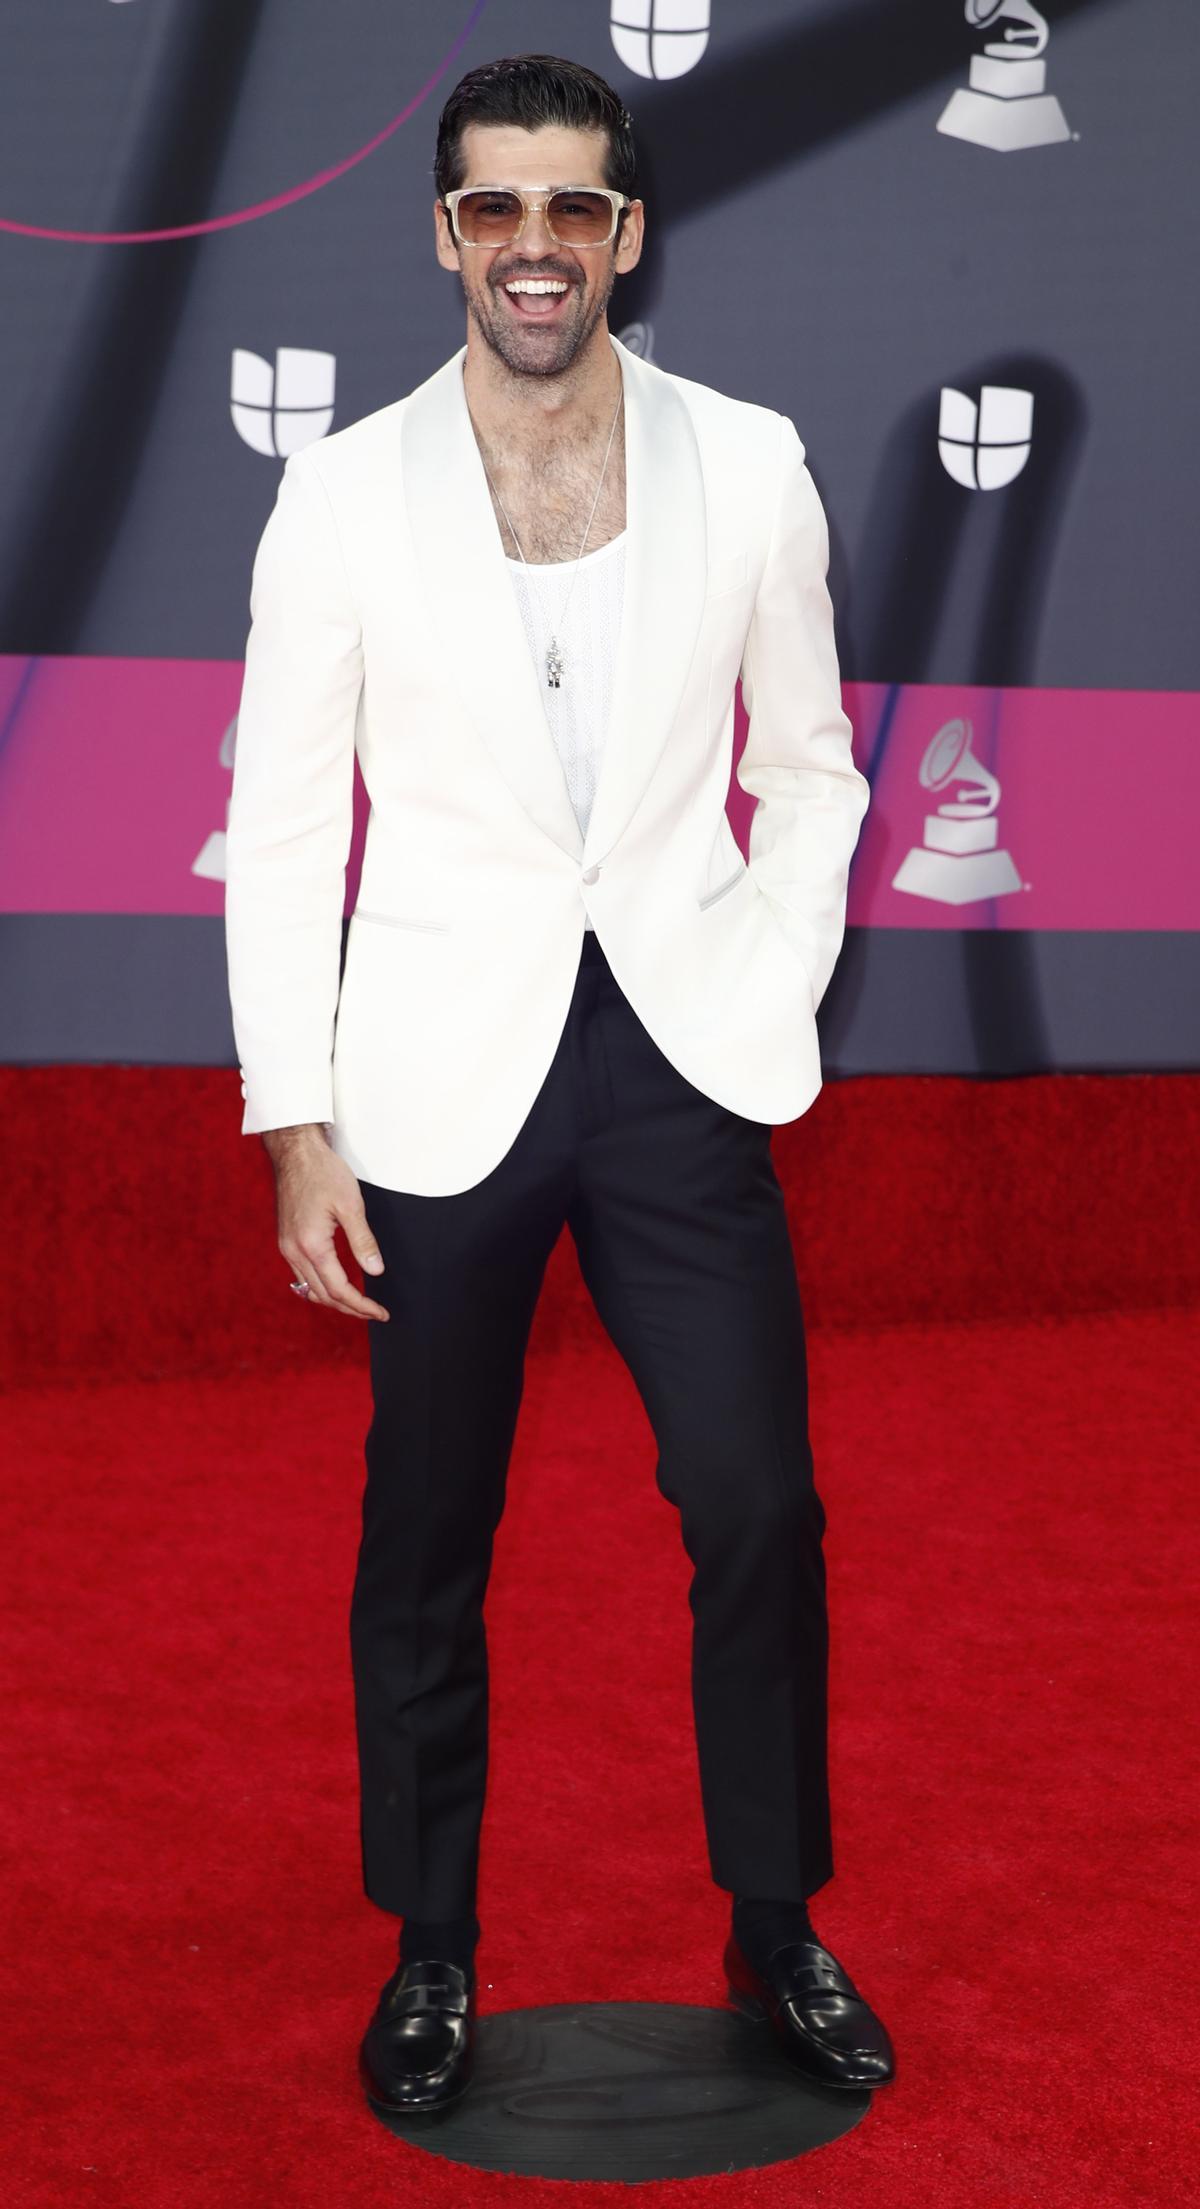 Las Vegas (United States), 17/11/2022.- Miguel Angel Munoz arrives on the red carpet prior to the 23rd Annual Latin Grammy Awards at the Michelob Ultra Arena at Mandalay Bay in Las Vegas, Nevada, USA, 17 November 2022. The Latin Grammys recognize artistic and/or technical achievement, not sales figures or chart positions, and the winners are determined by the votes of their peers - the qualified voting members of the Latin Recording Academy. (Estados Unidos) EFE/EPA/CAROLINE BREHMAN